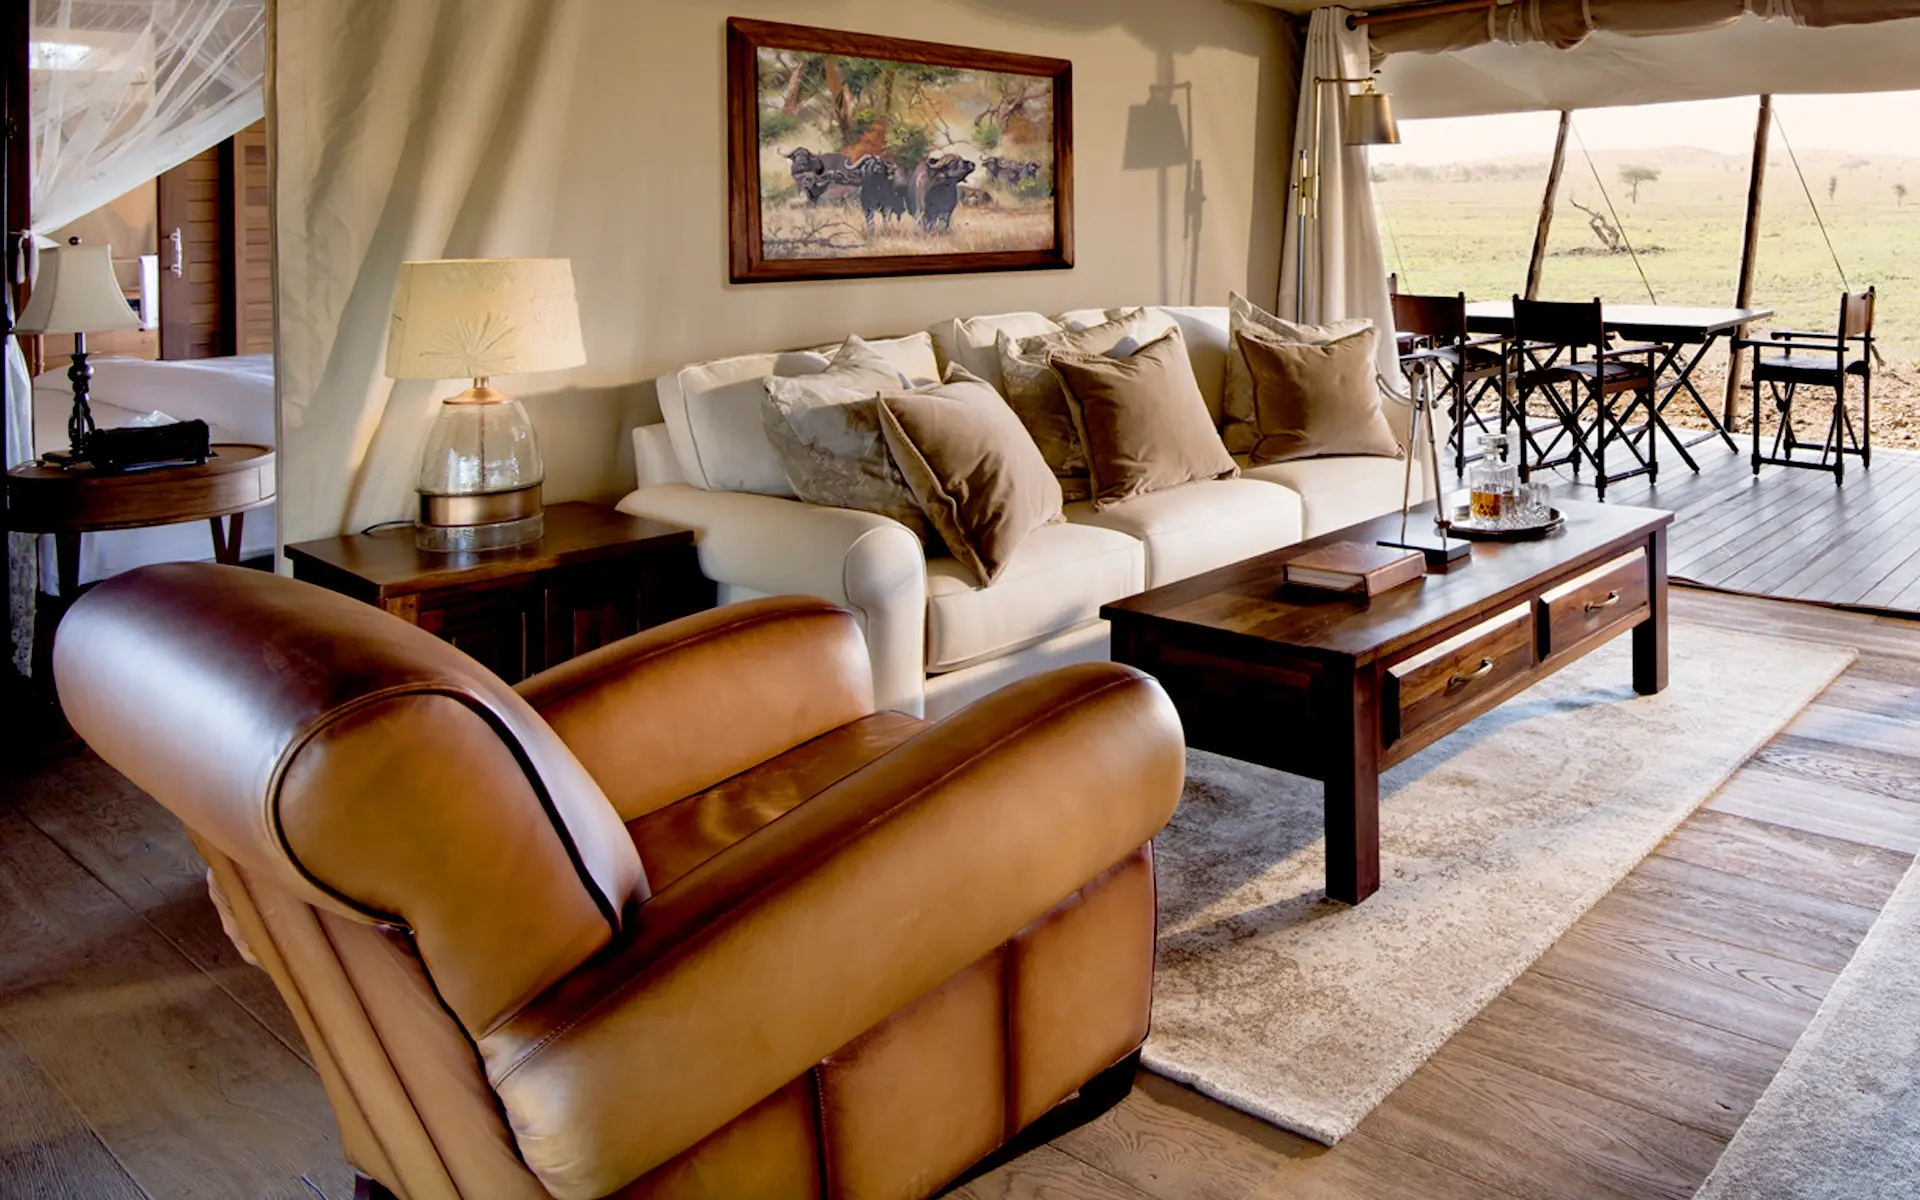 Living room area with savannah view in the luxury family tent in Serengeti